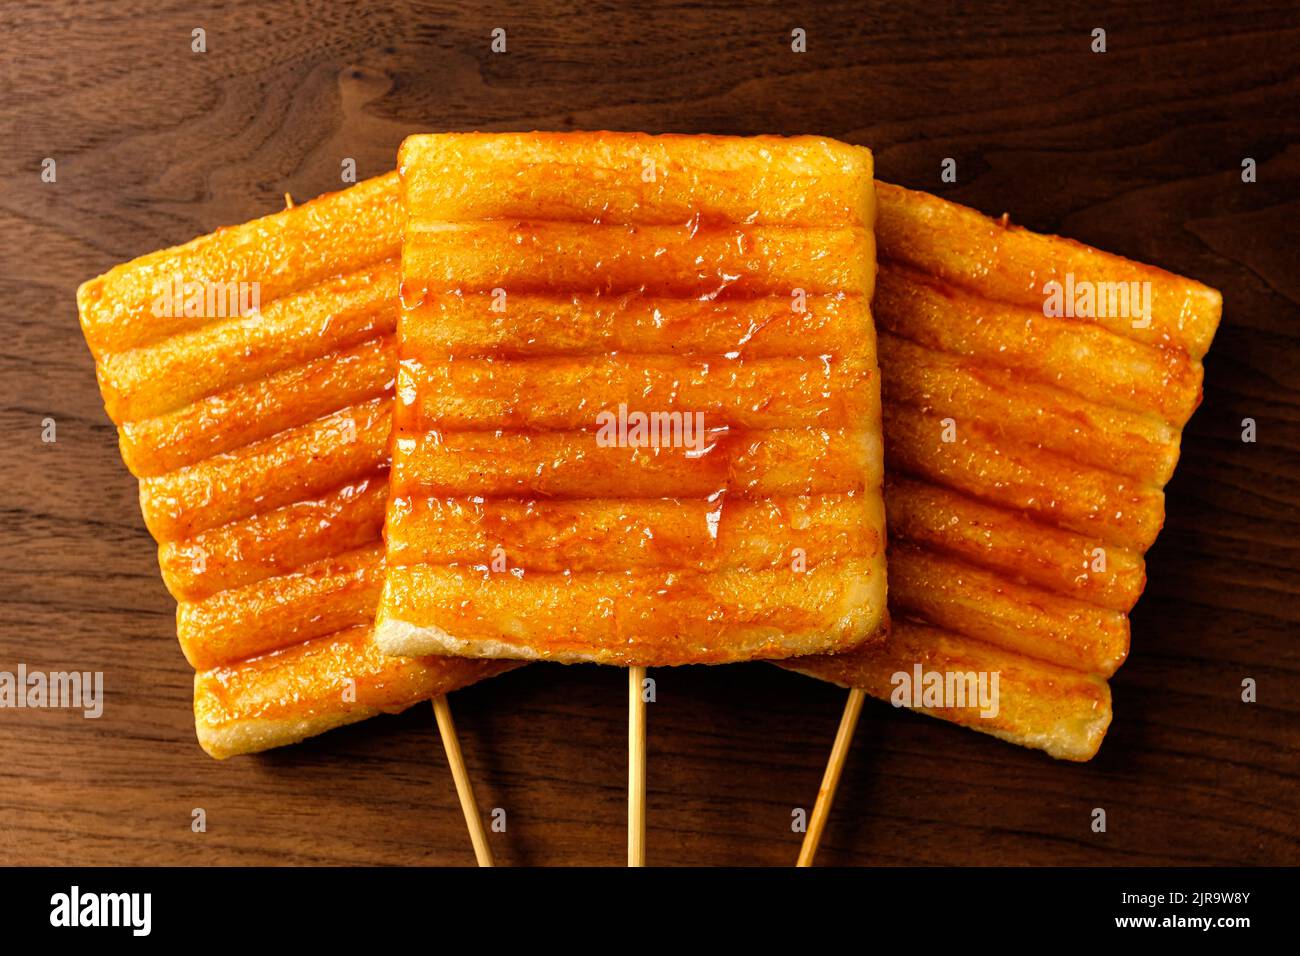 Korean food culture. A dish of fried rice cakes on a skewer. Food seasoned with red pepper paste Stock Photo